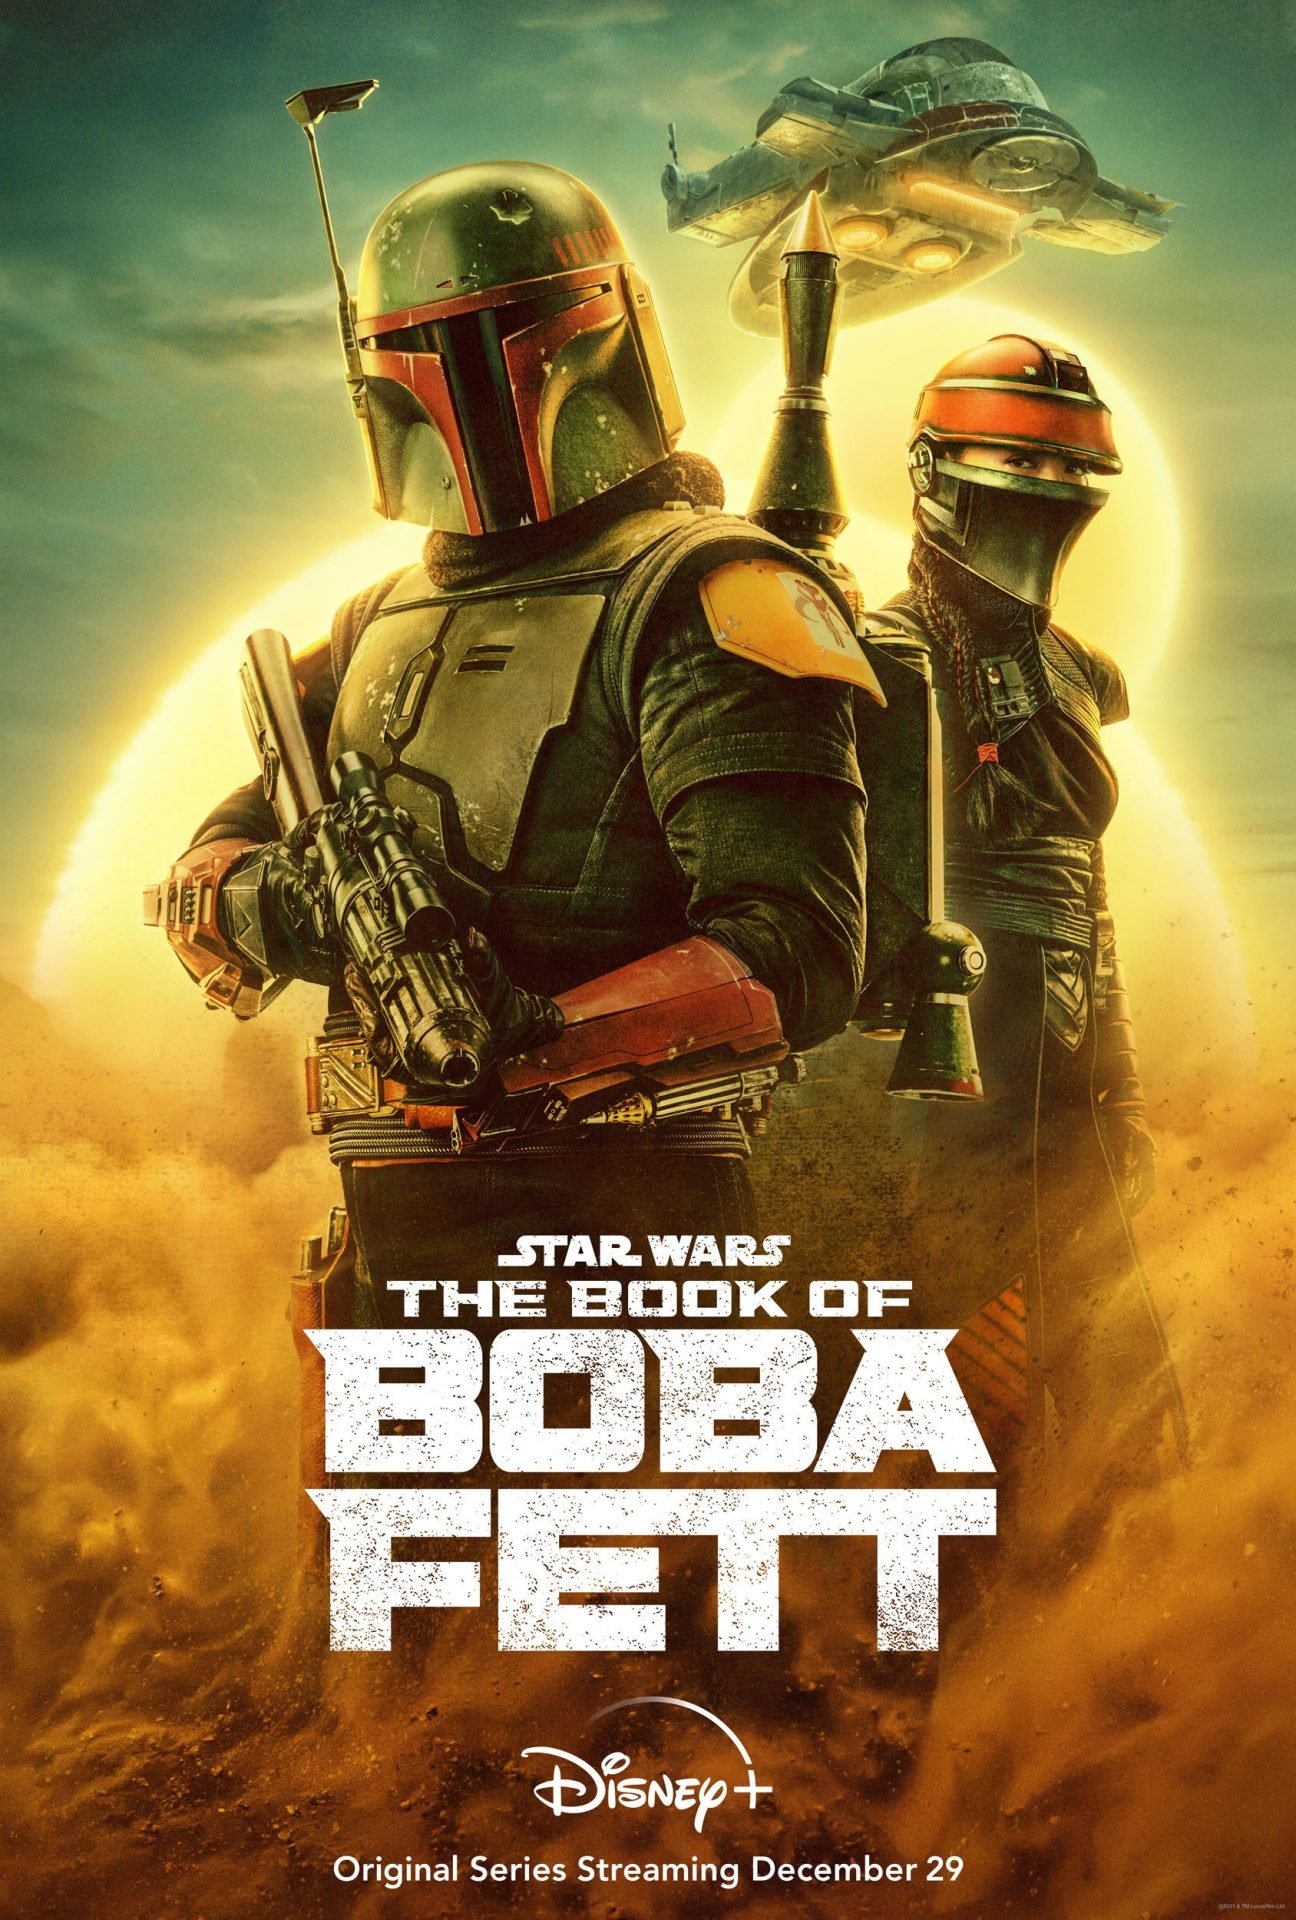 The Book of Boba Fett (Episode 1) Review